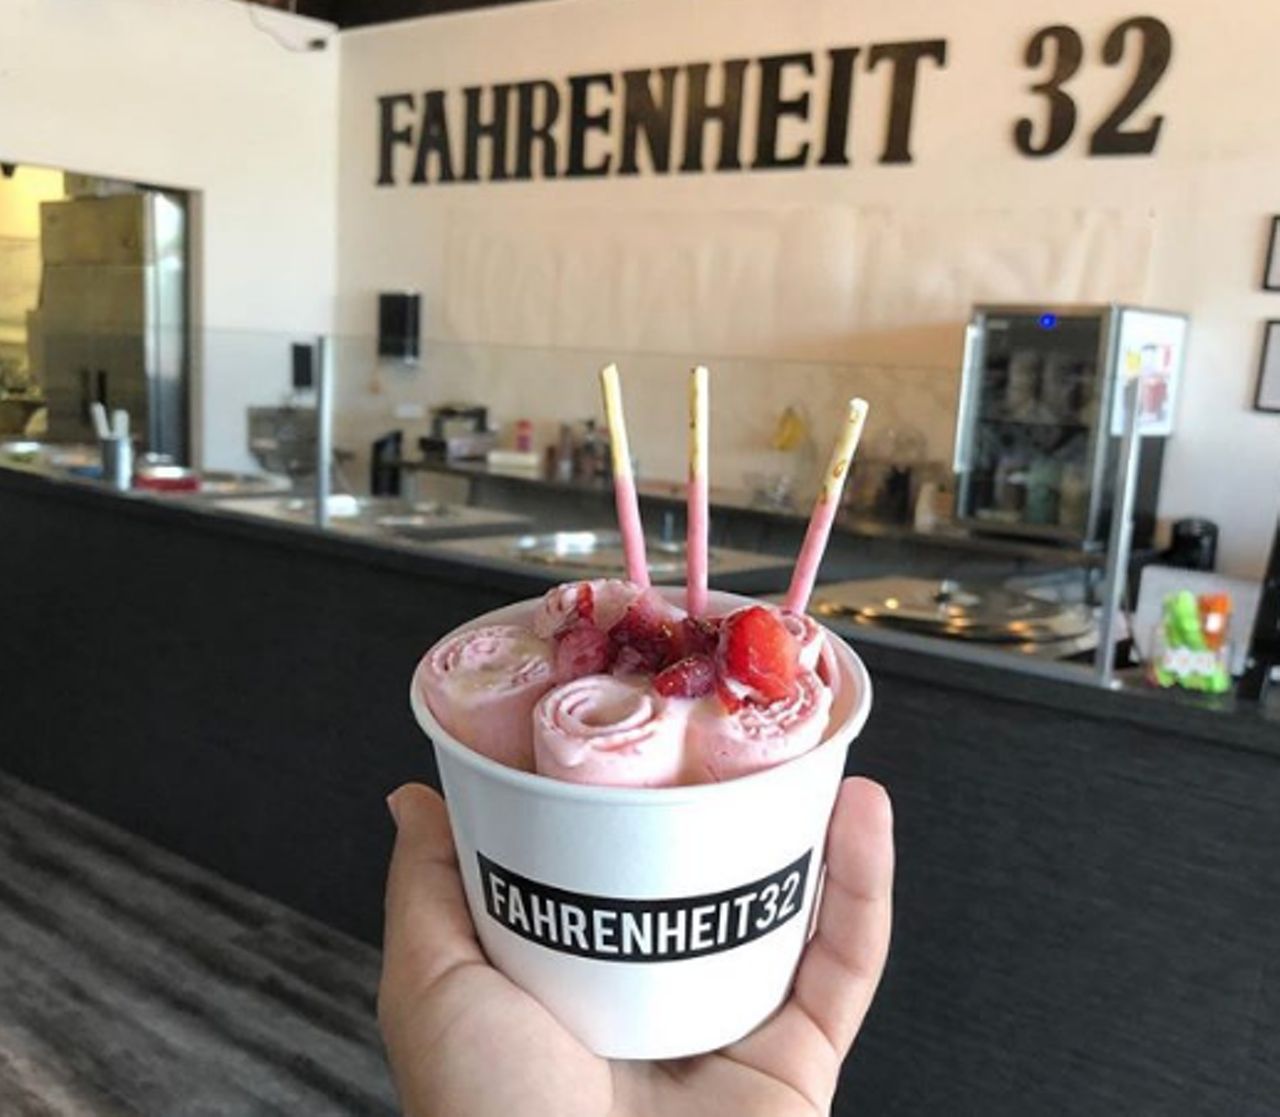 Fahrenheit 32
Multiple locations, facebook.com/fahrenheit32
With two locations in San Antonio, the El Paso-based Fahrenheit 32 satisfies locals’ antojo for hand-rolled, Thai-style ice cream. Whether you go for something traditional or cater to your puro taste buds, you will quickly devour whatever you order.
Photo via Instagram / fahrenheit32sa